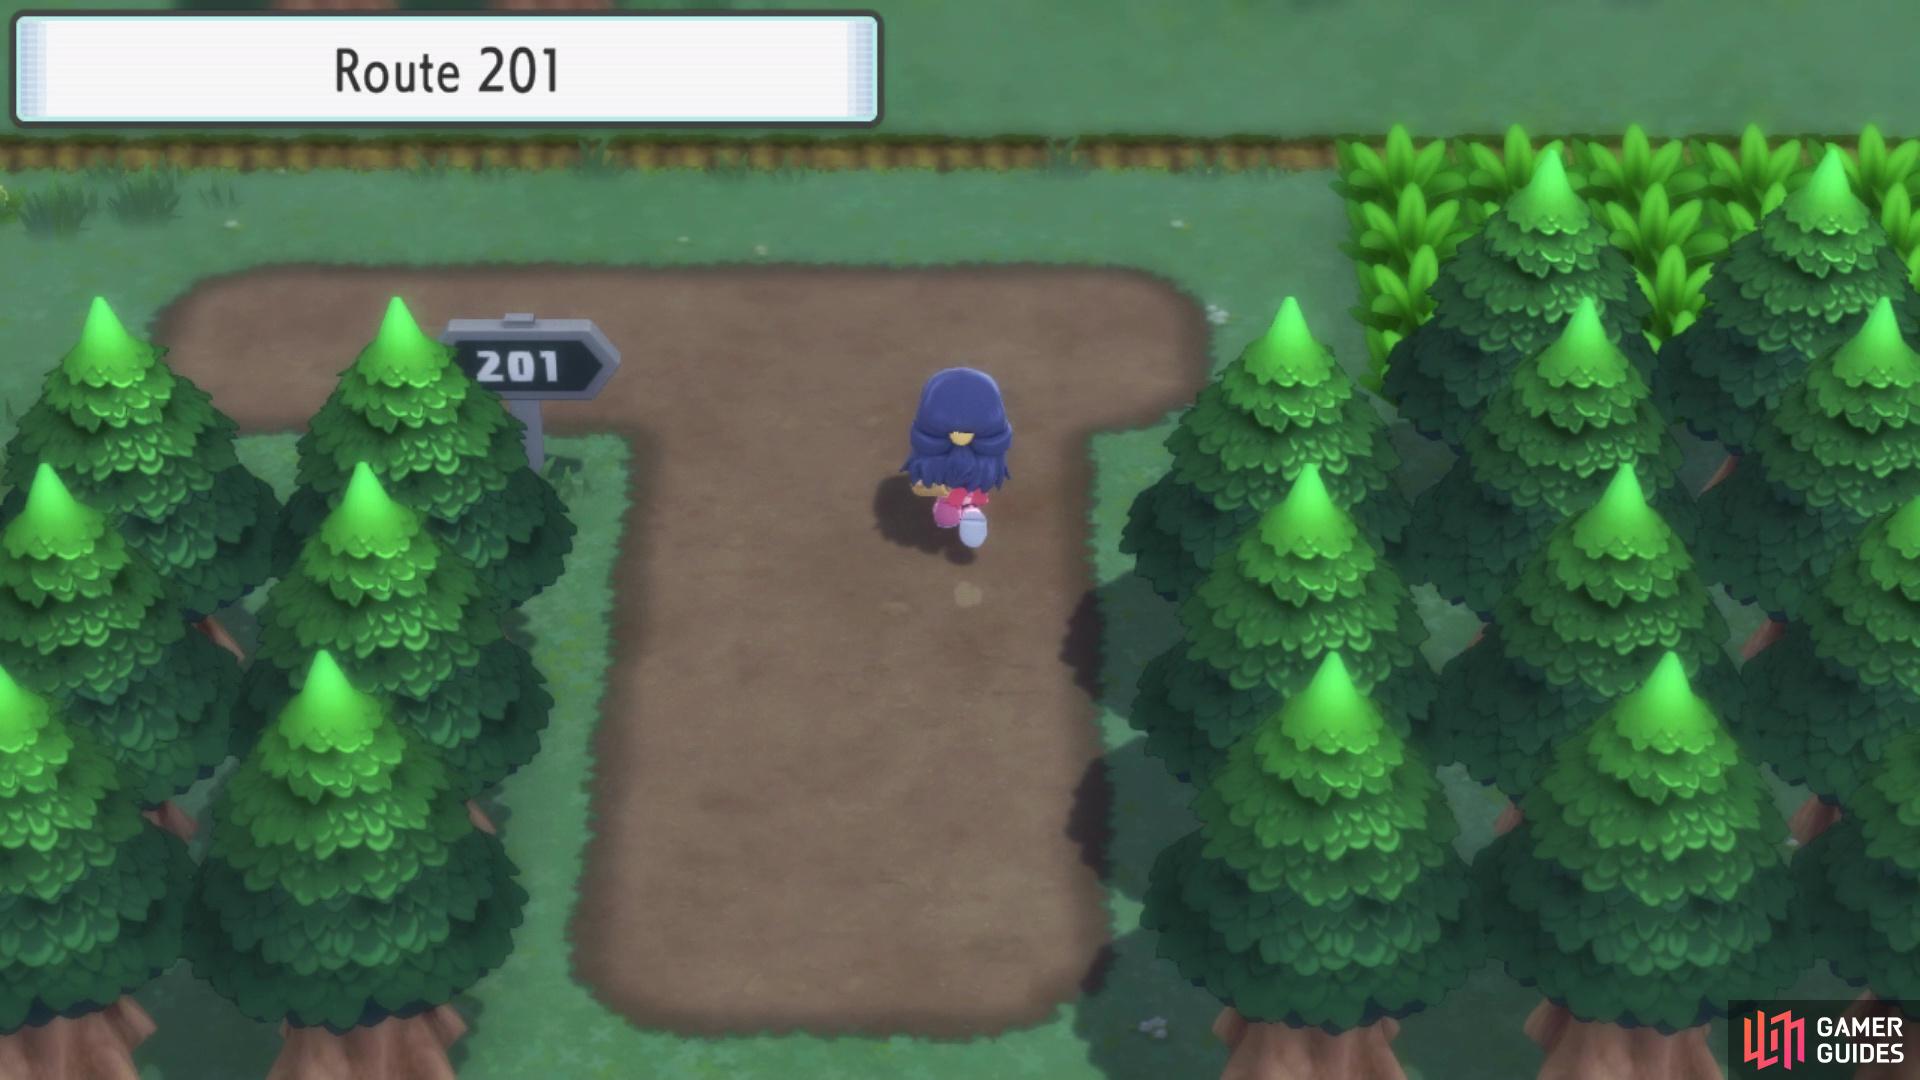 Route 201 can be accessed from Twinleaf Town.